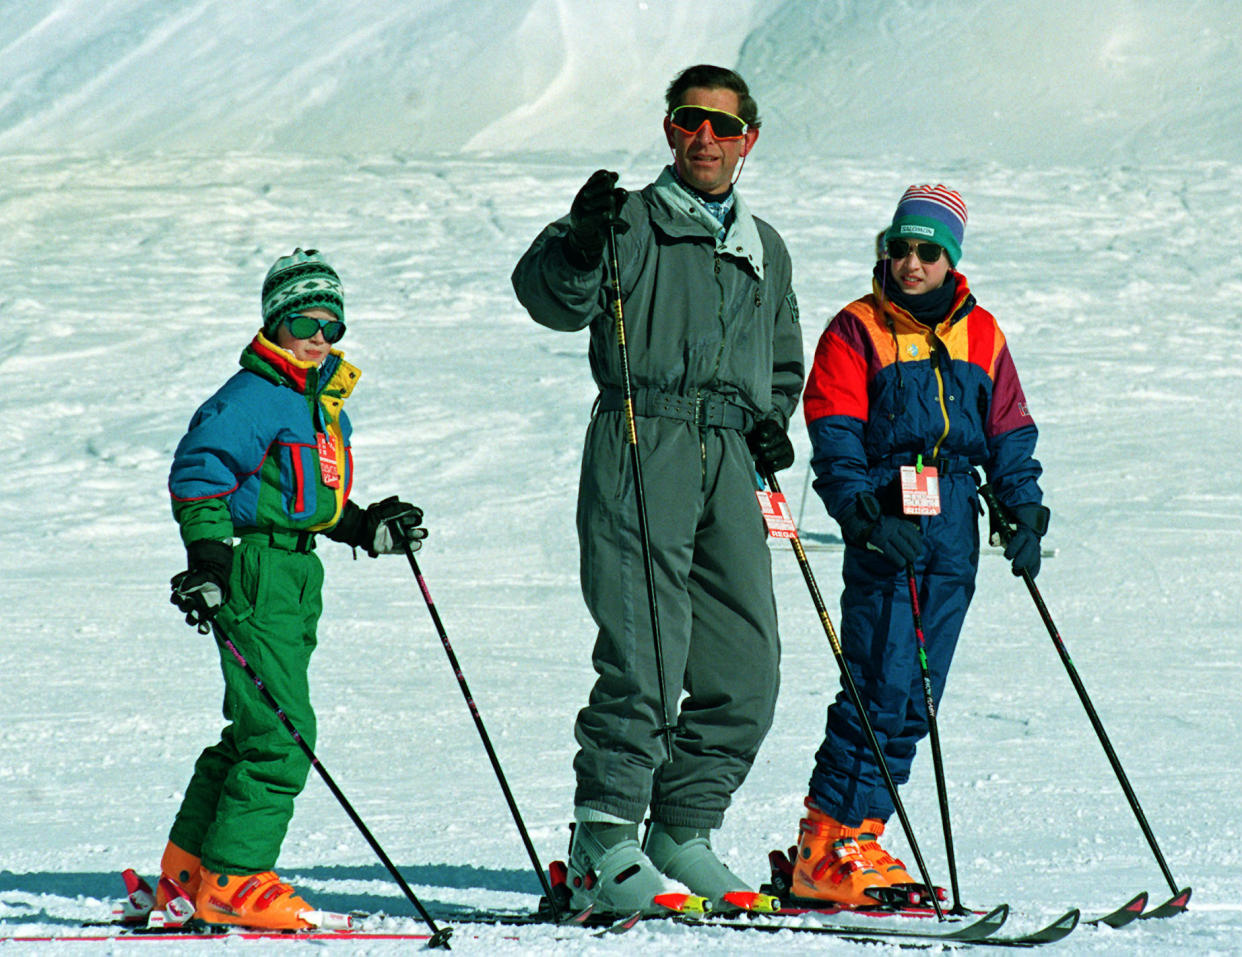 Prince of Wales on the slopes in Klosters, Switzerland, where he is on a skiing holiday with his sons Princes William (r) and Harry.